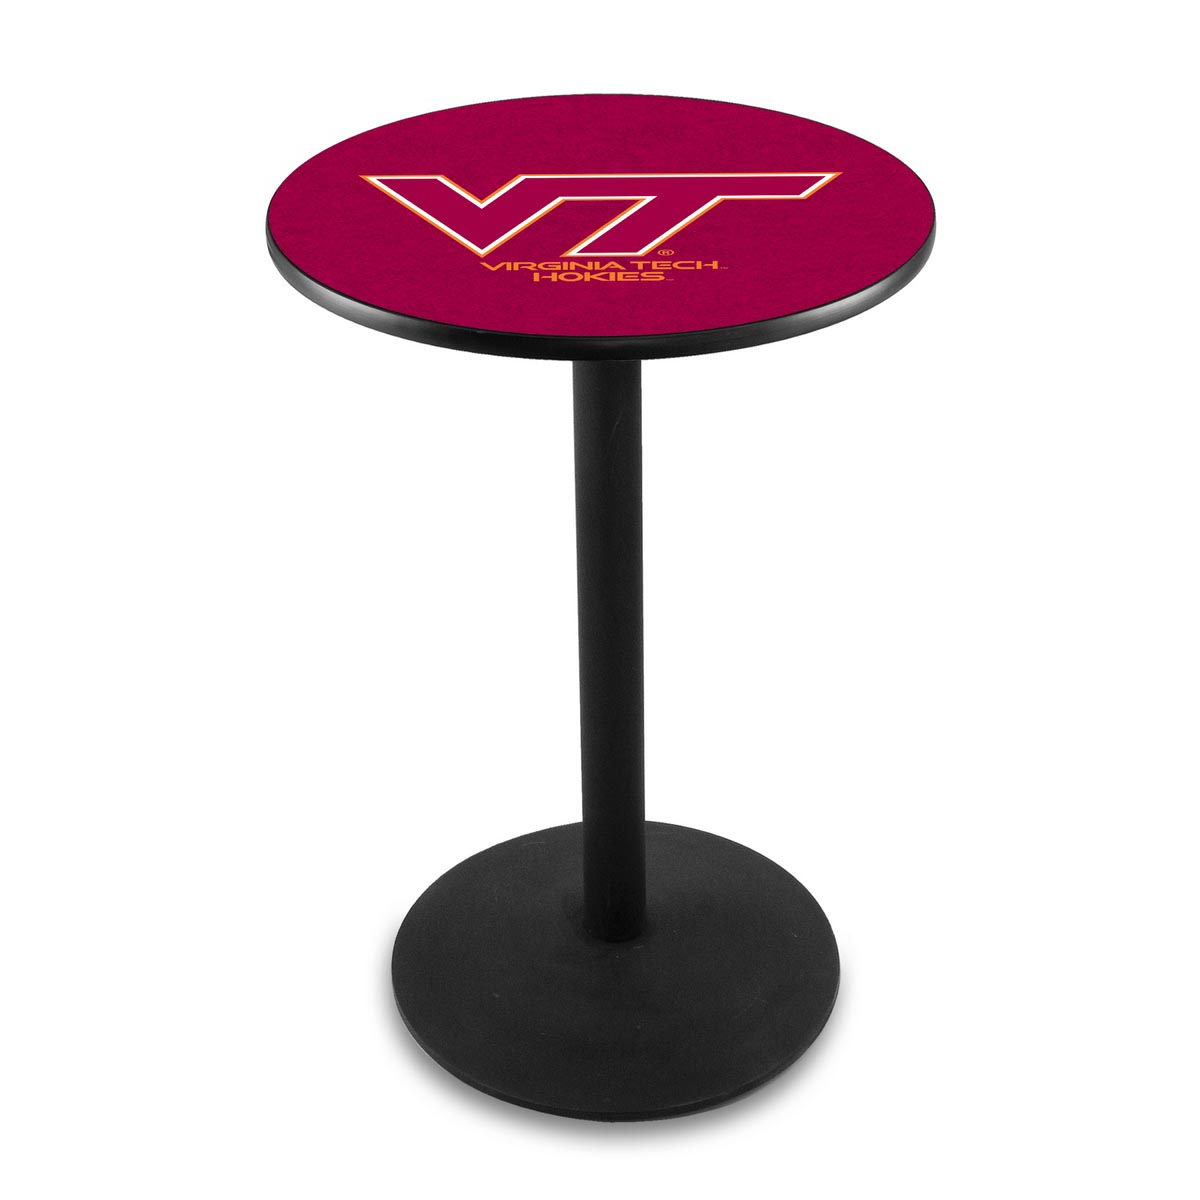 Virginia Tech University Logo Pub Bar Table With Round Stand